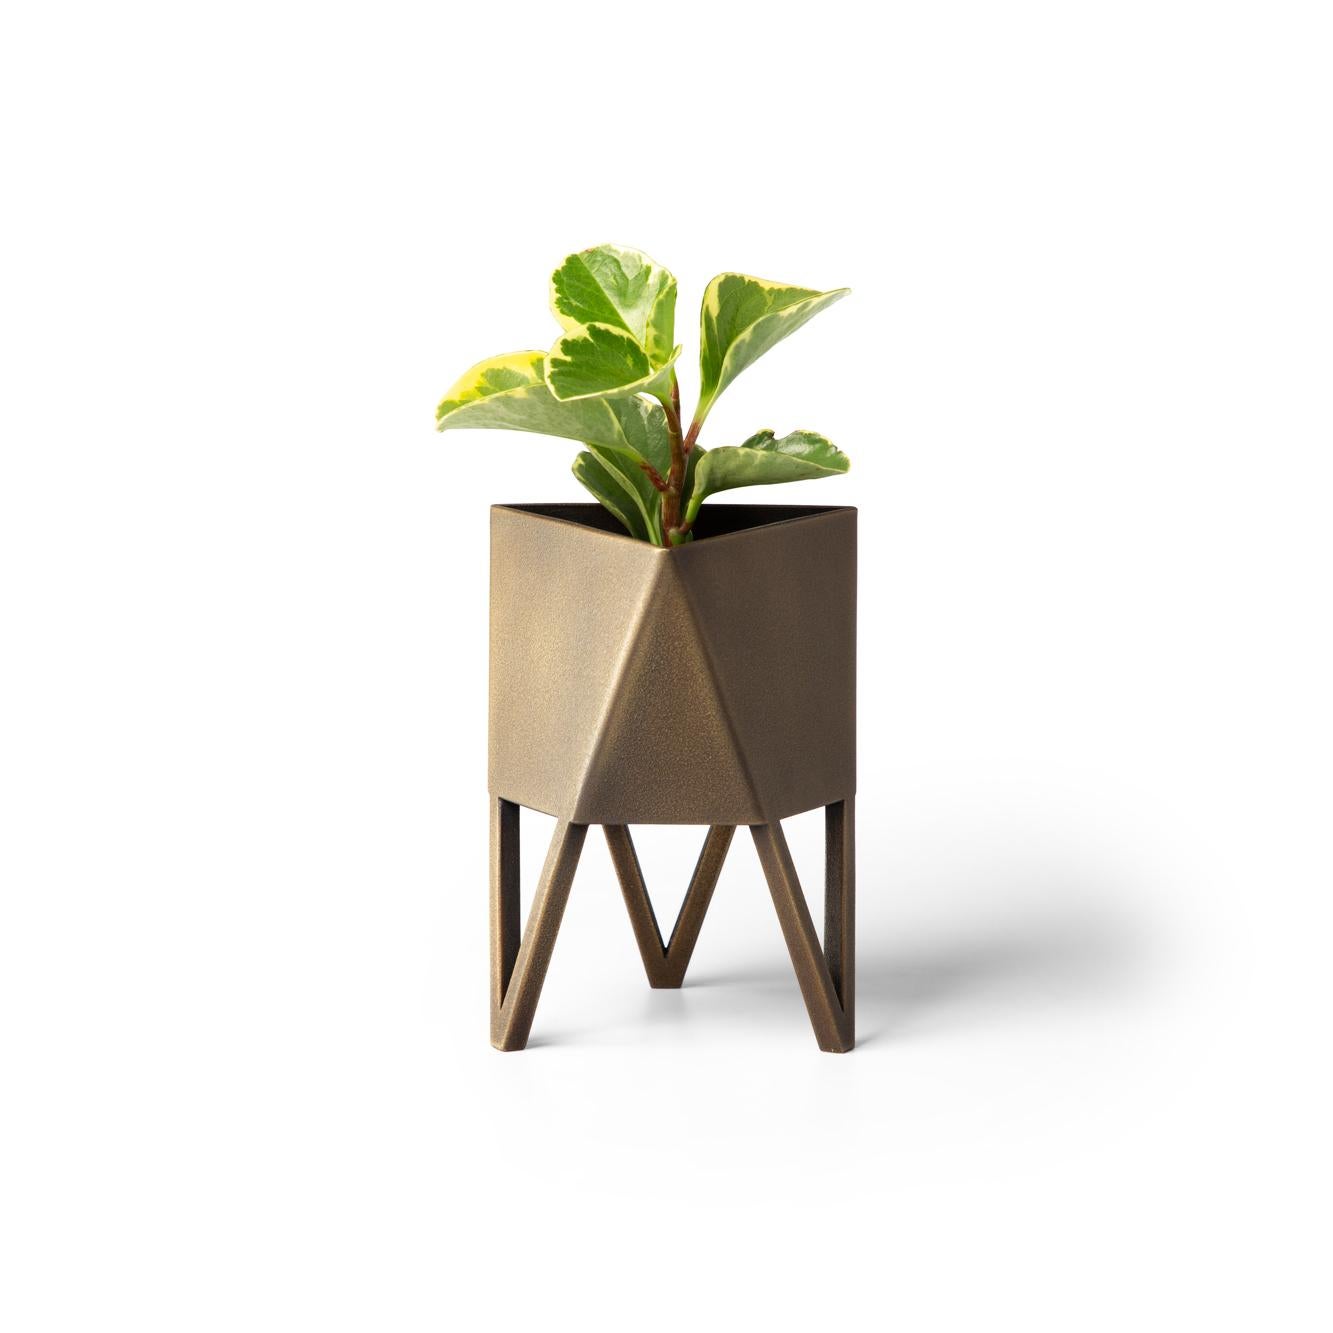 Deca Planter in Black By Force/Collide, Size Large, 2023 For Sale 7